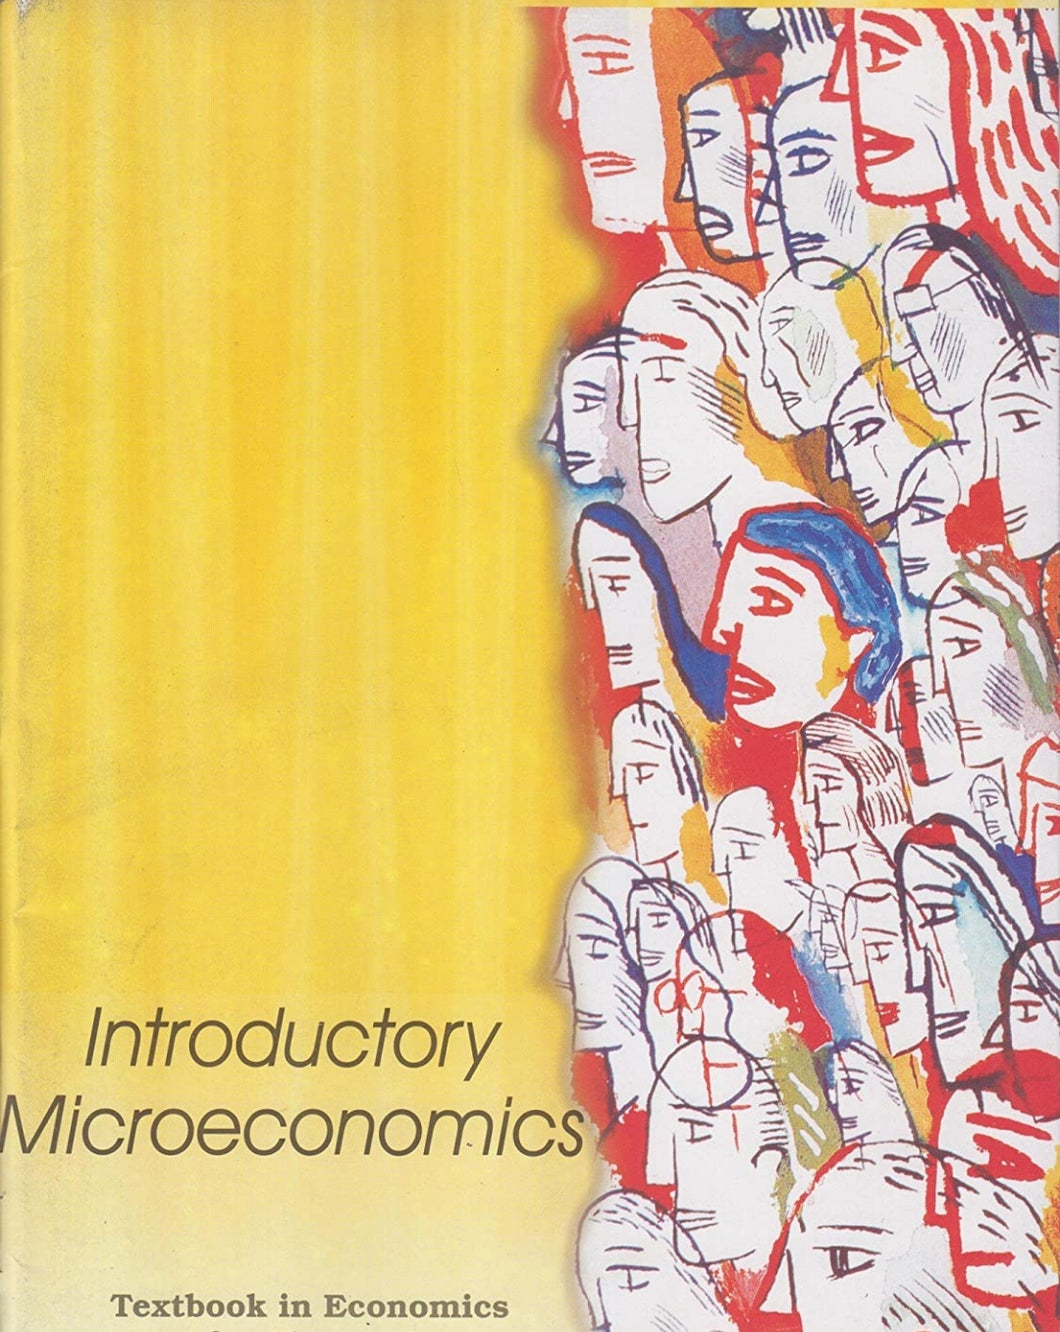 NCERT Microeconomics for Class 12 - latest edition as per NCERT/CBSE - Booksfy